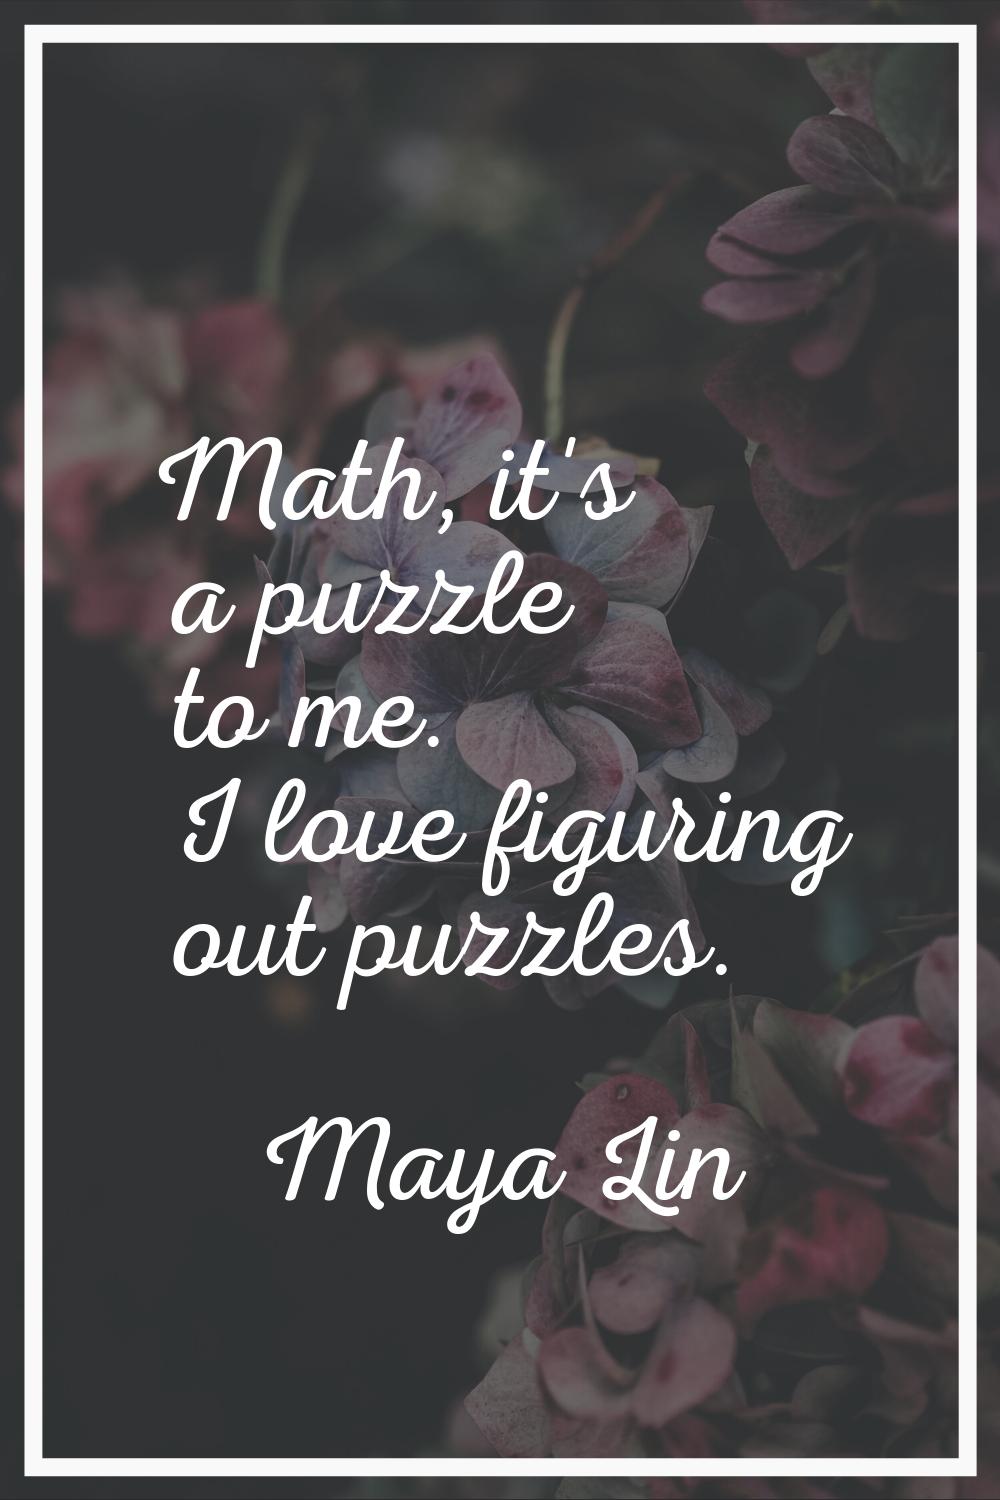 Math, it's a puzzle to me. I love figuring out puzzles.